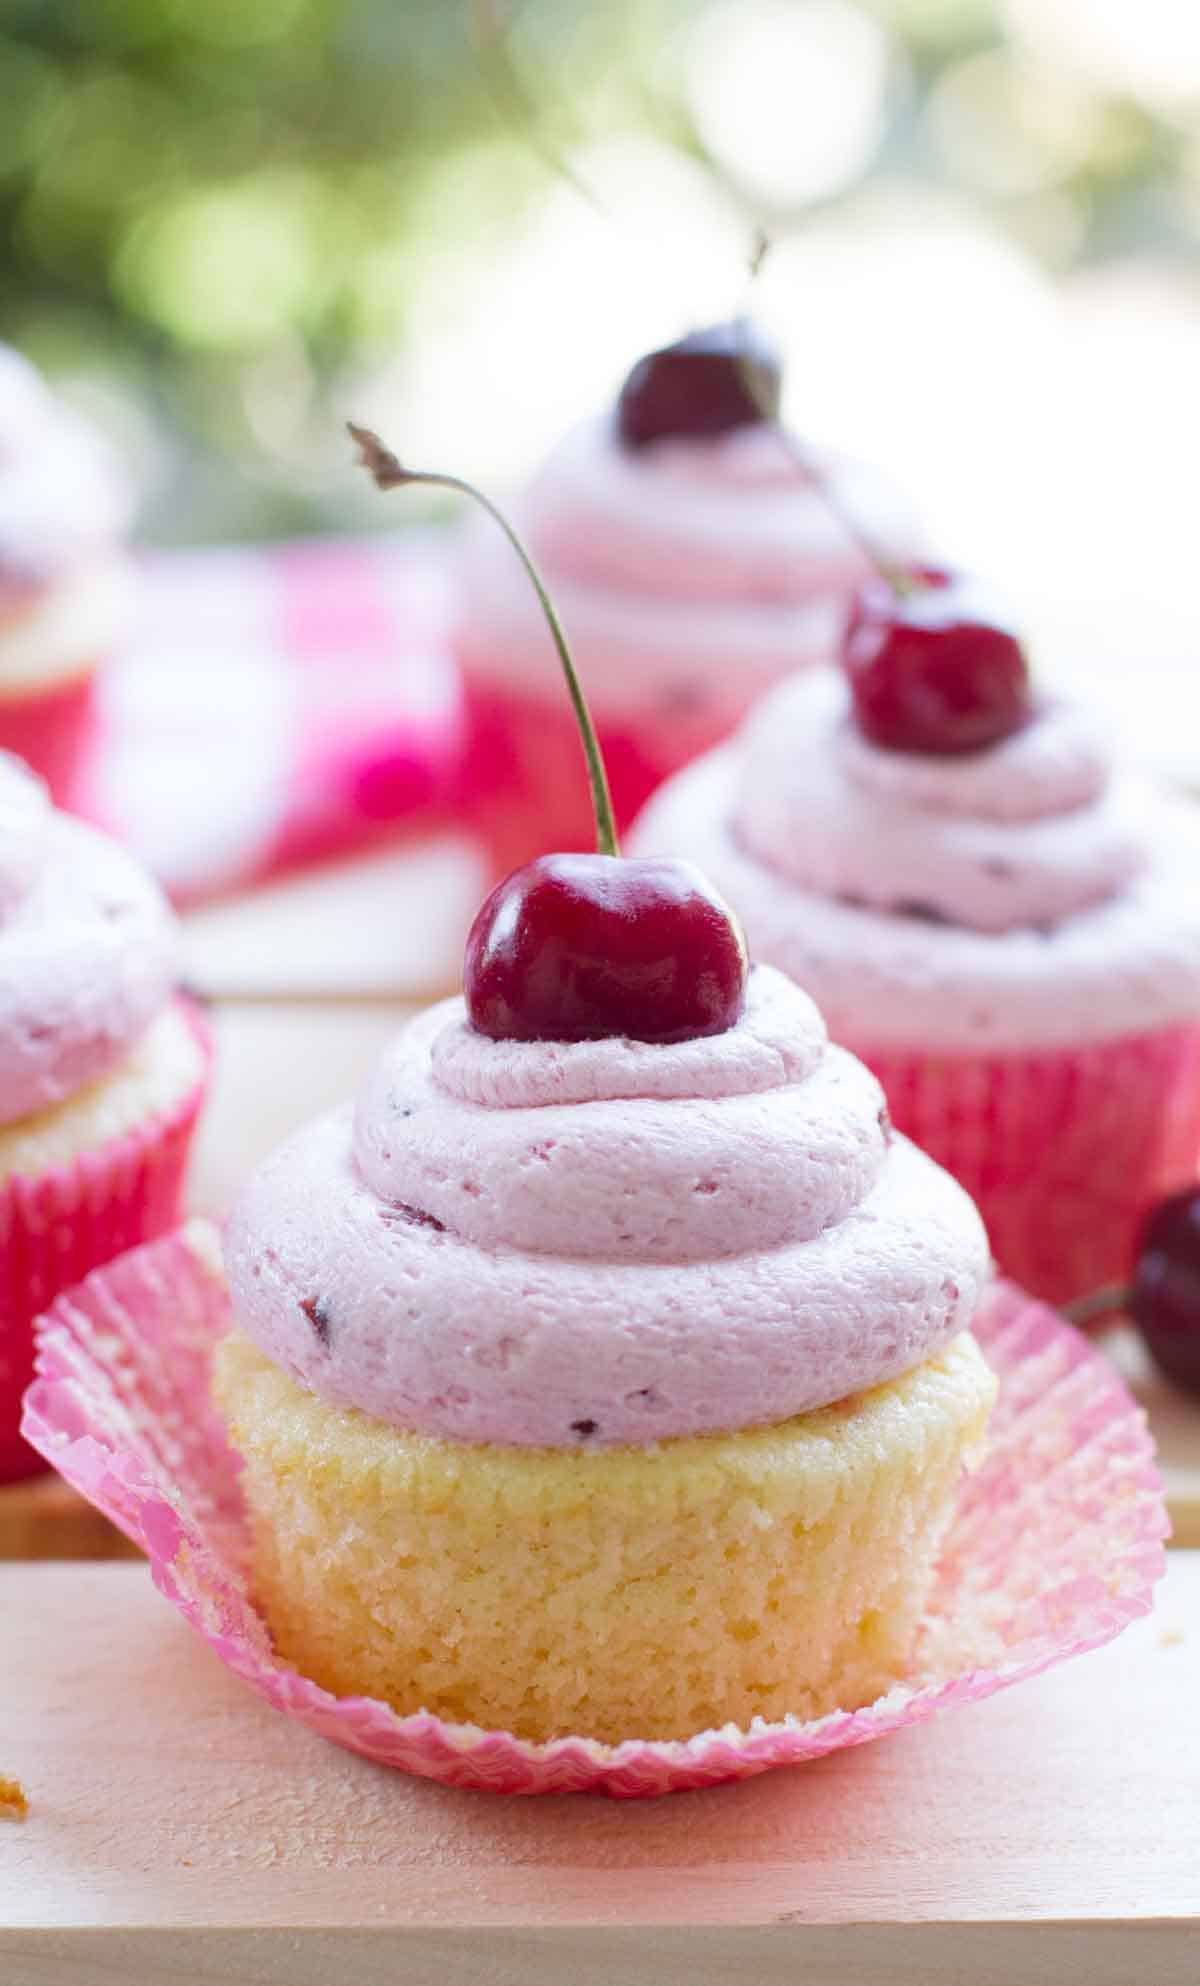 almond cupcake with the paper pulled back showing texture, topped with fresh cherry frosting.